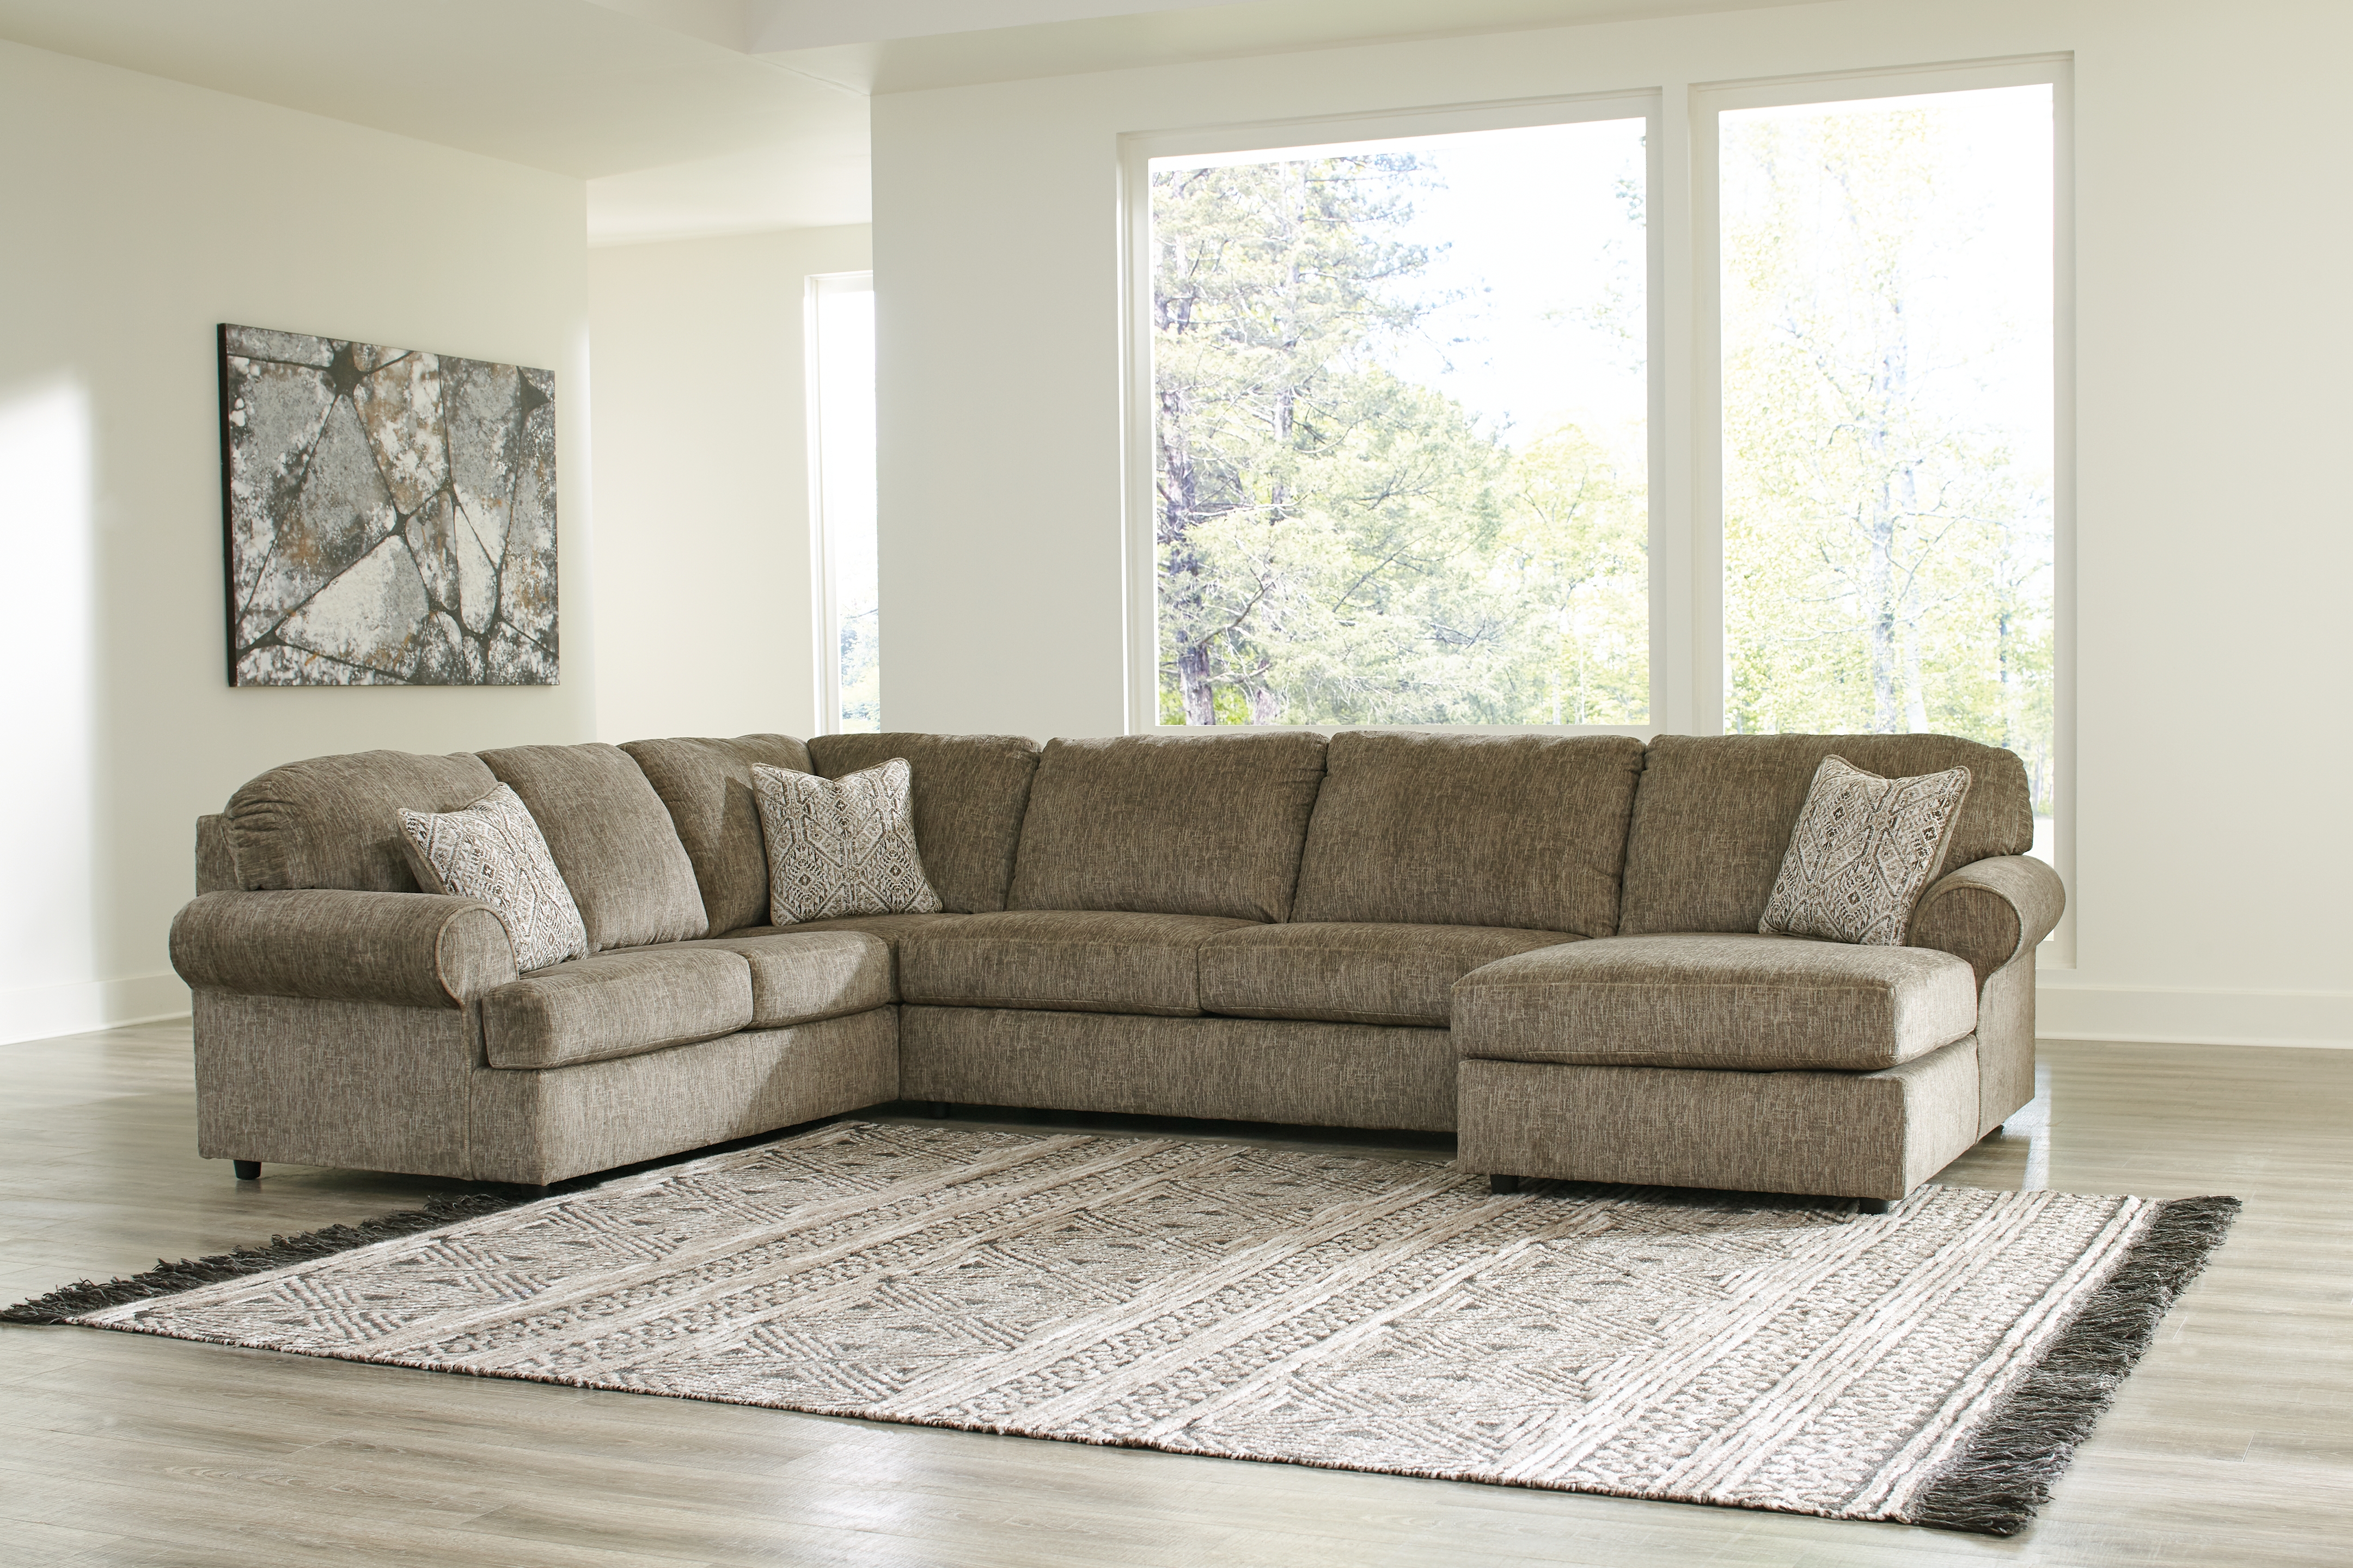 Hoylake 3 Piece Sectional With Chaise